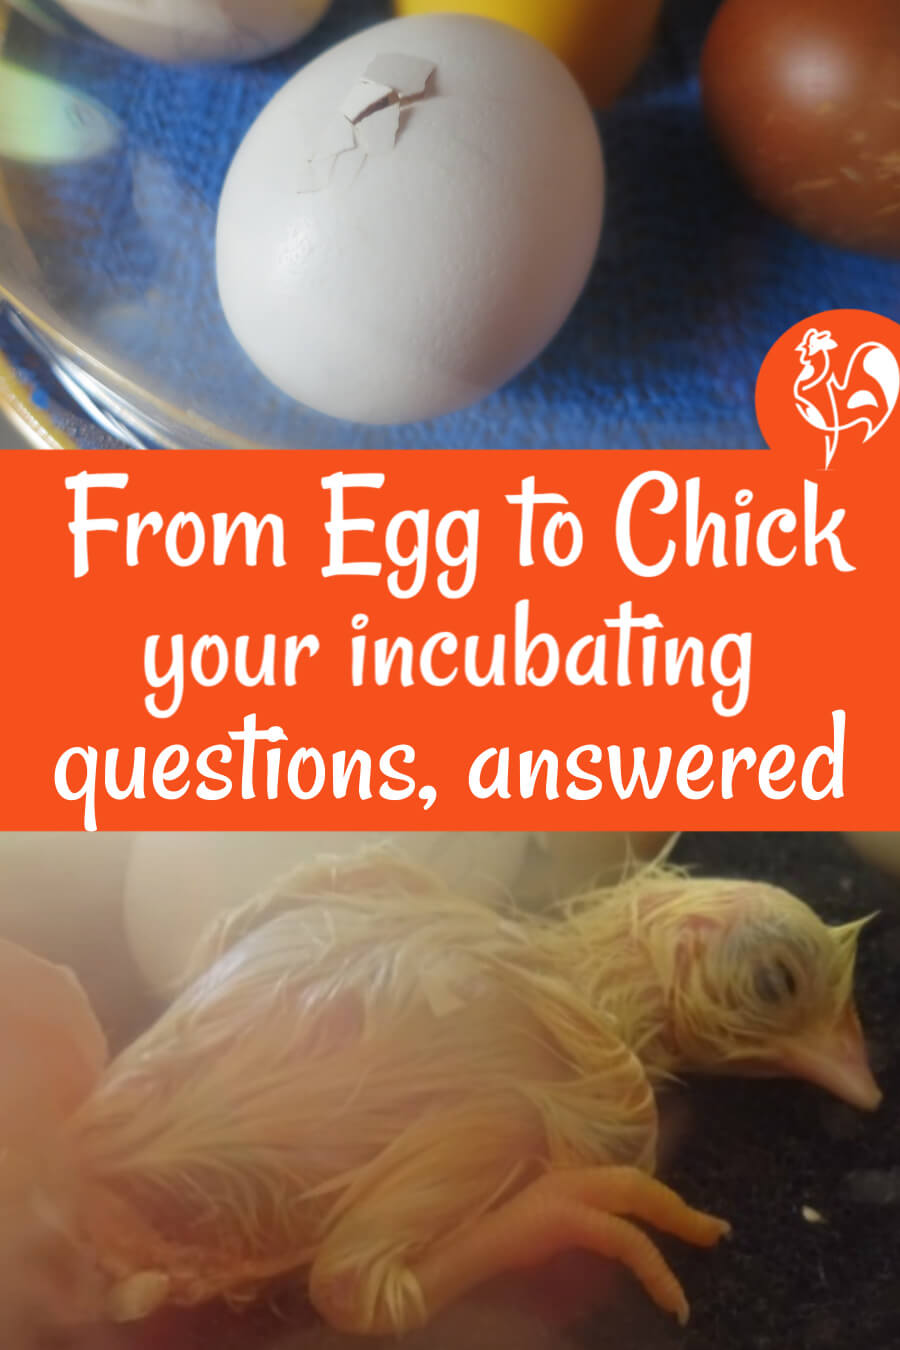 Incubating chicken eggs frequently asked questions - Pin for later.